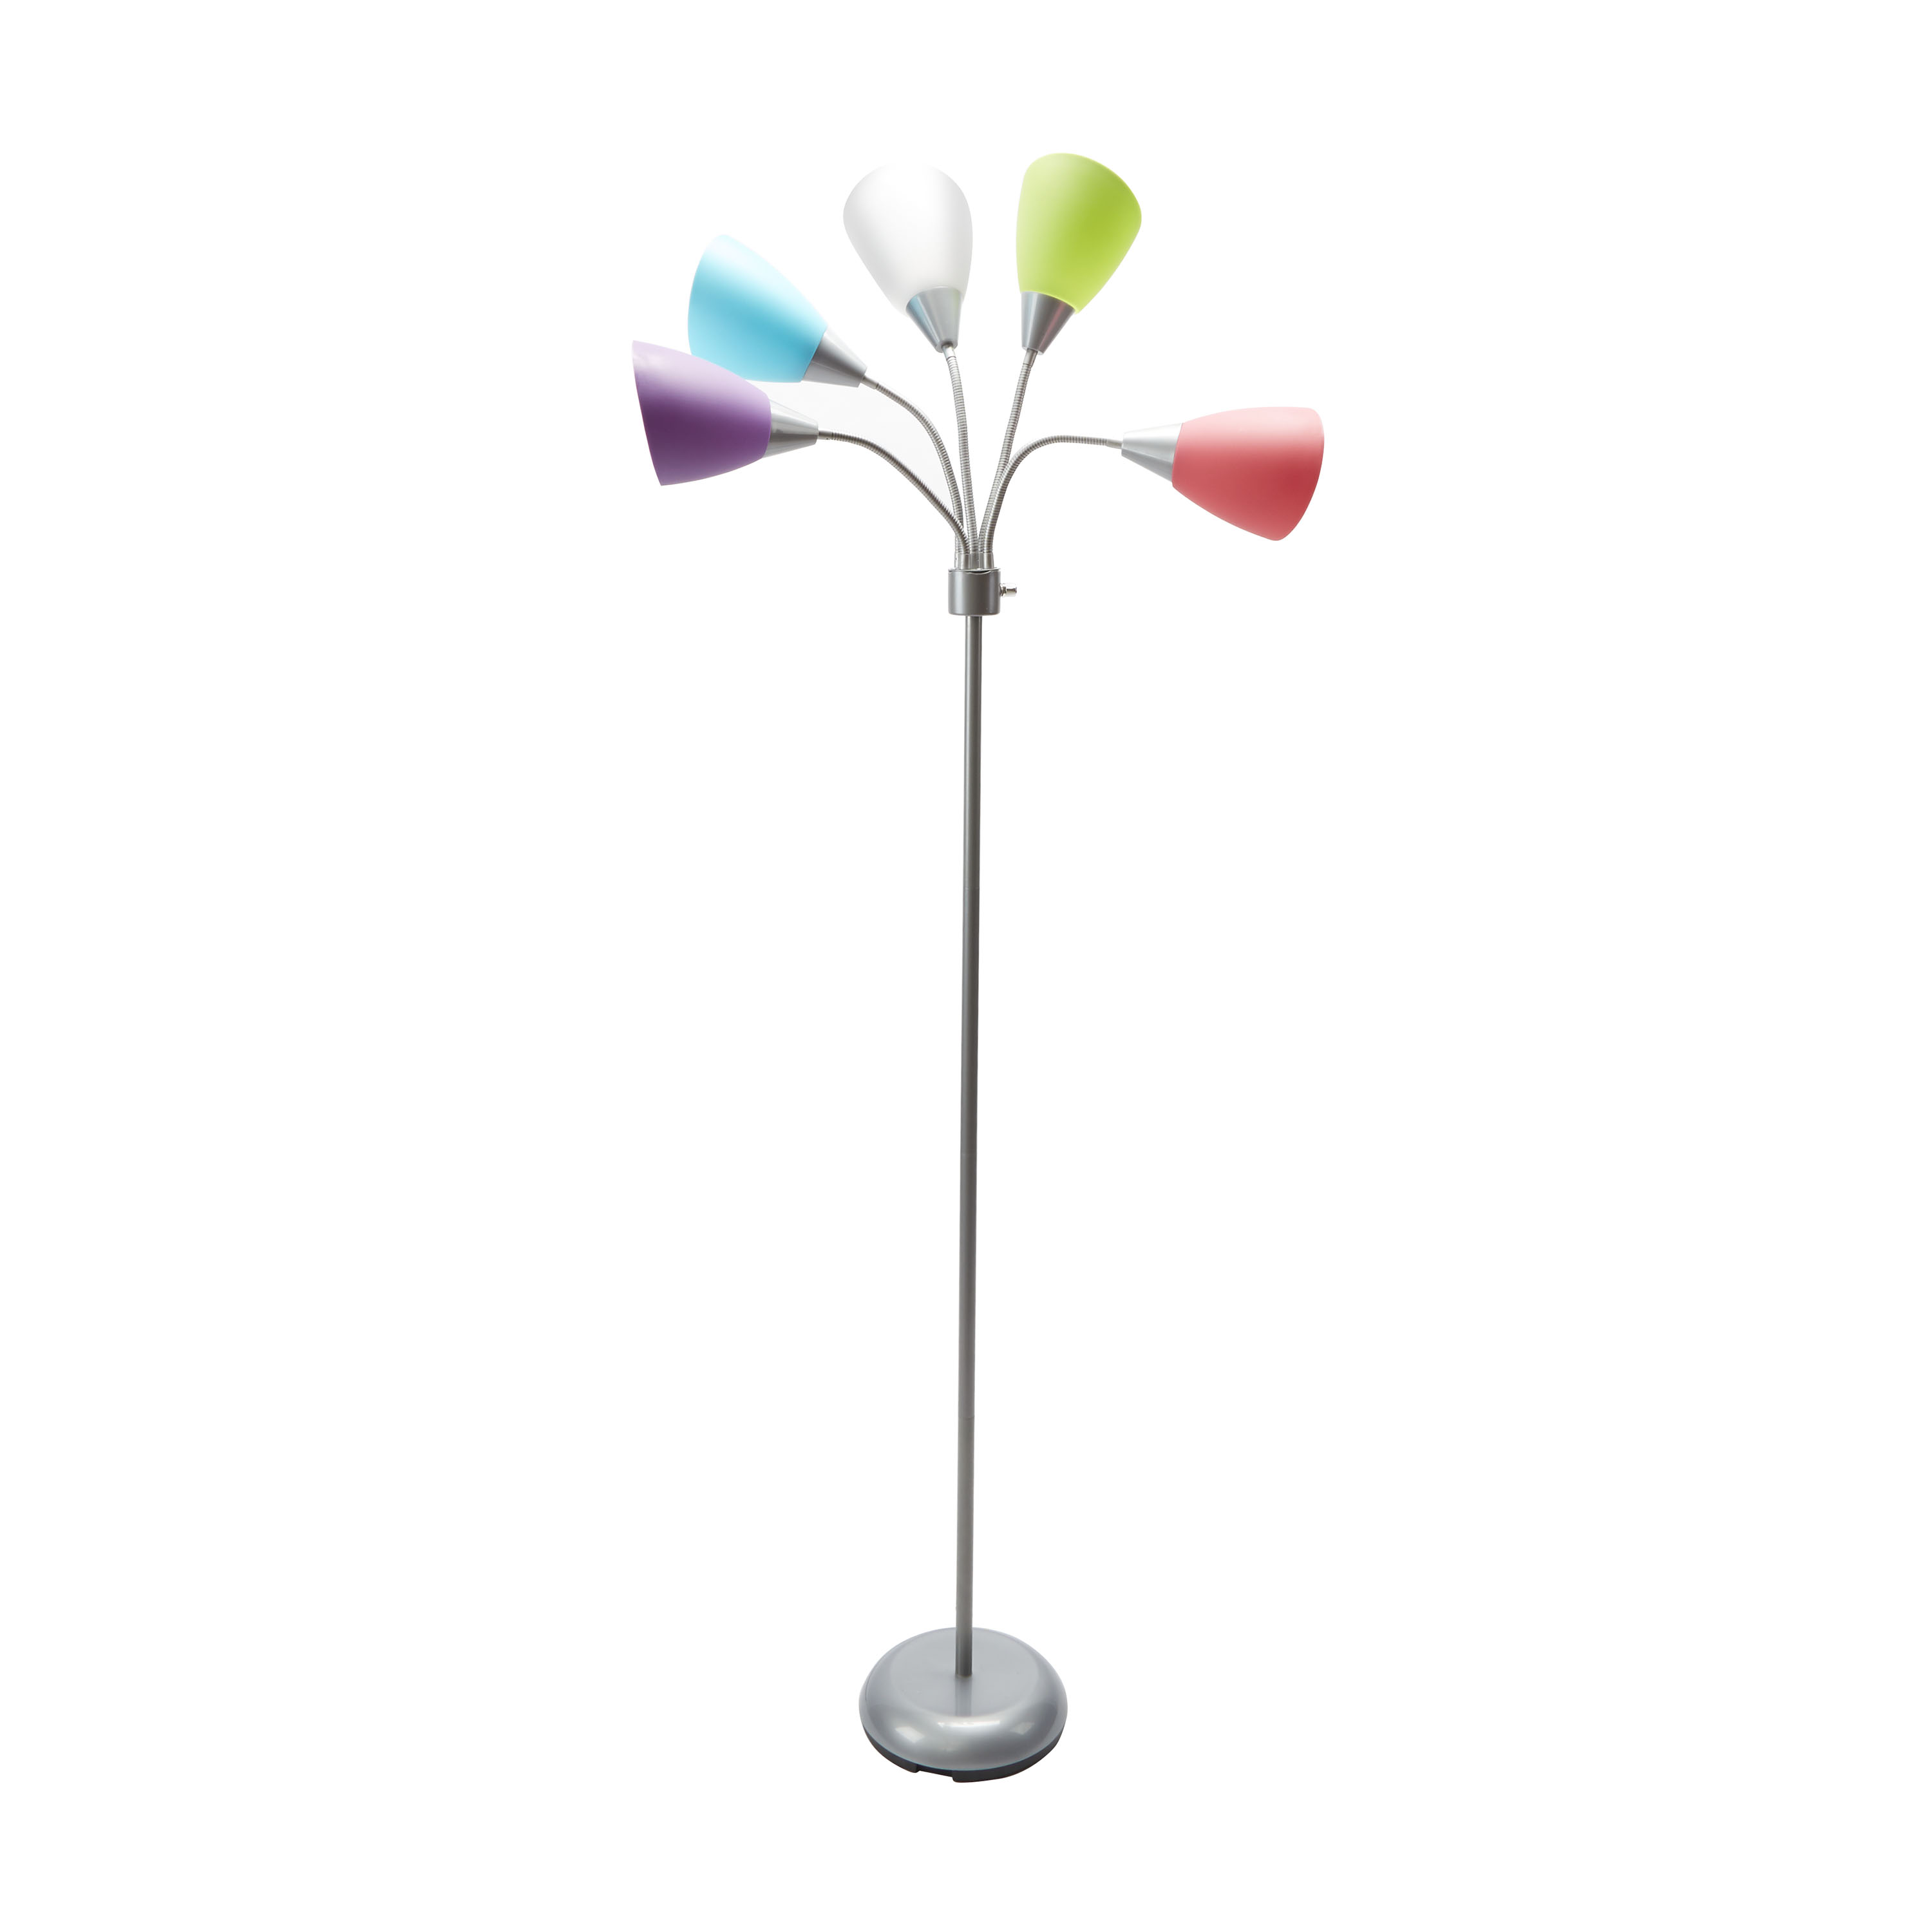 Mainstays 5 Light Floor Lamp, Silver Color with Multi Color Shades Made of Metal - image 1 of 6